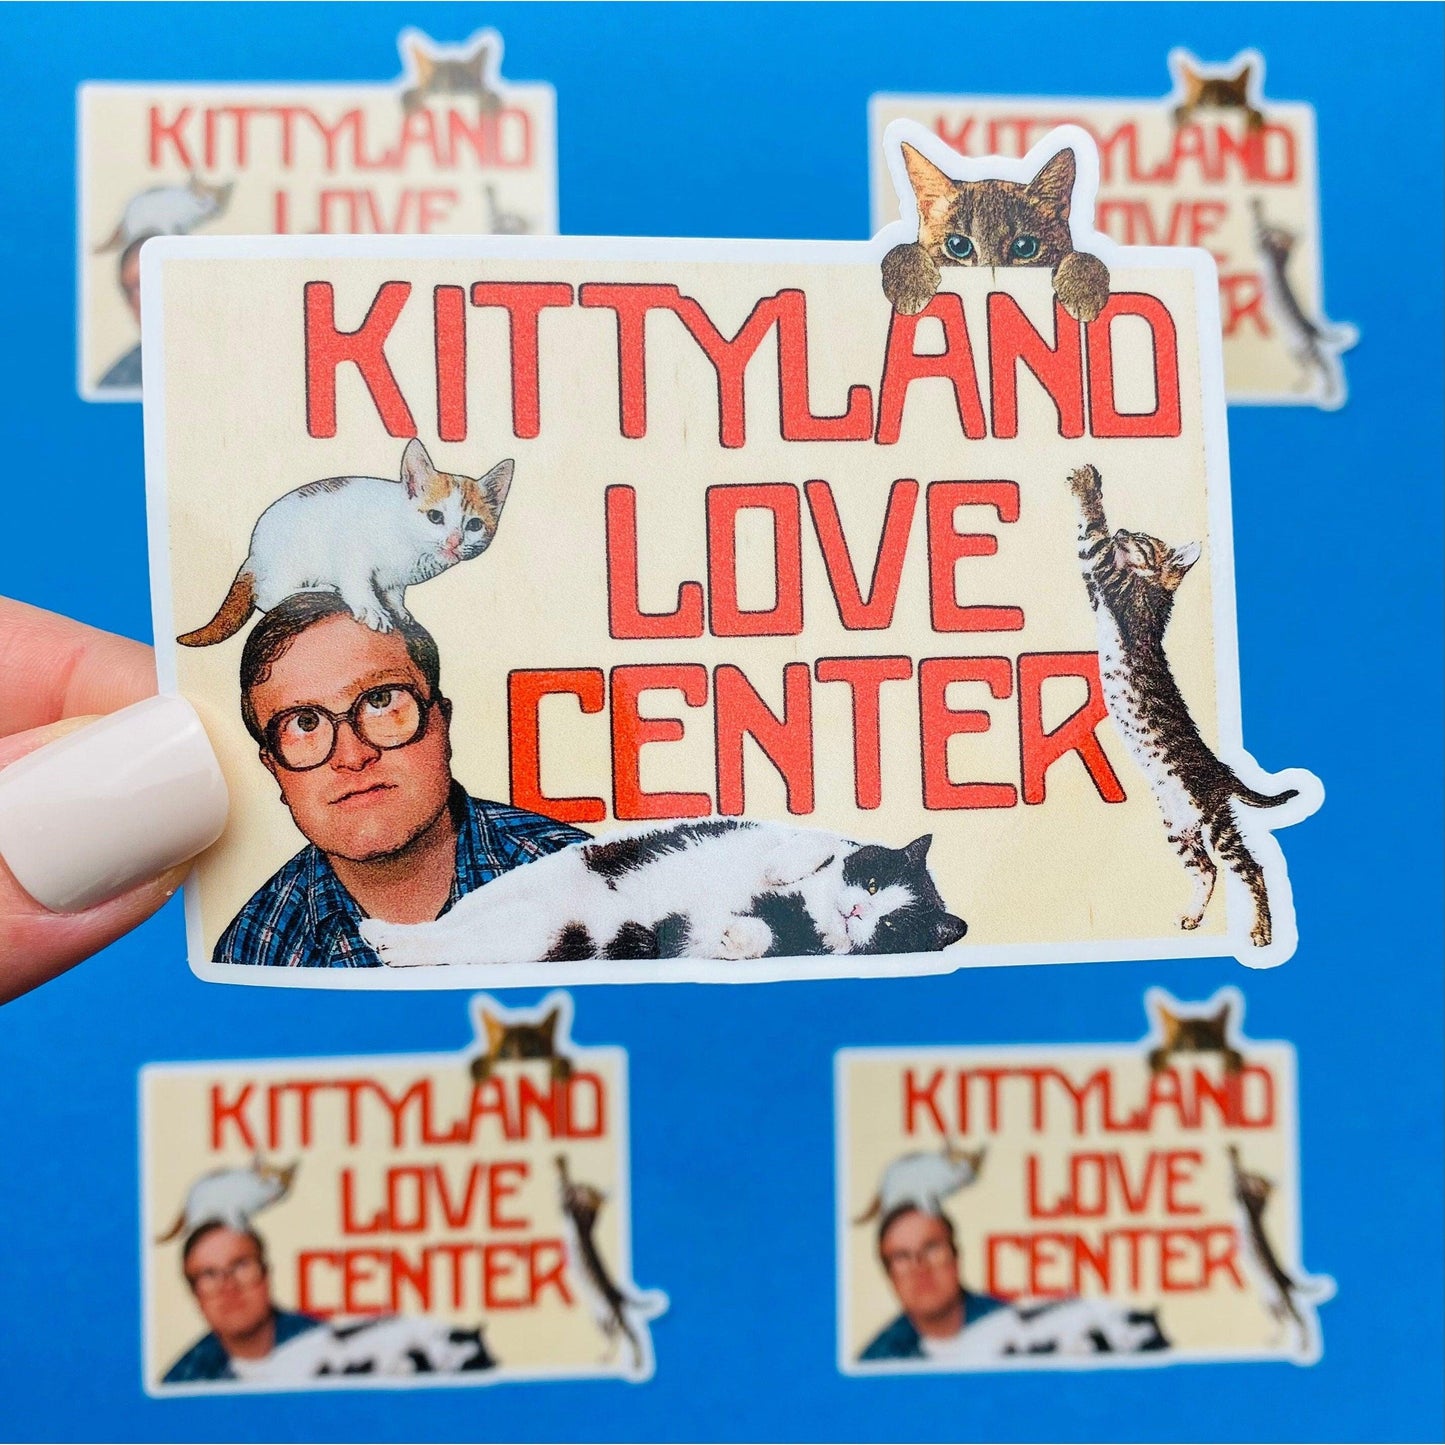 Trailer Park Boys Kittyland Love Center Sticker | Officially Licensed Bubbles Sticker | Trailer Park Boys Funny Cat Sticker - Ottos Grotto :: Stickers For Your Stuff